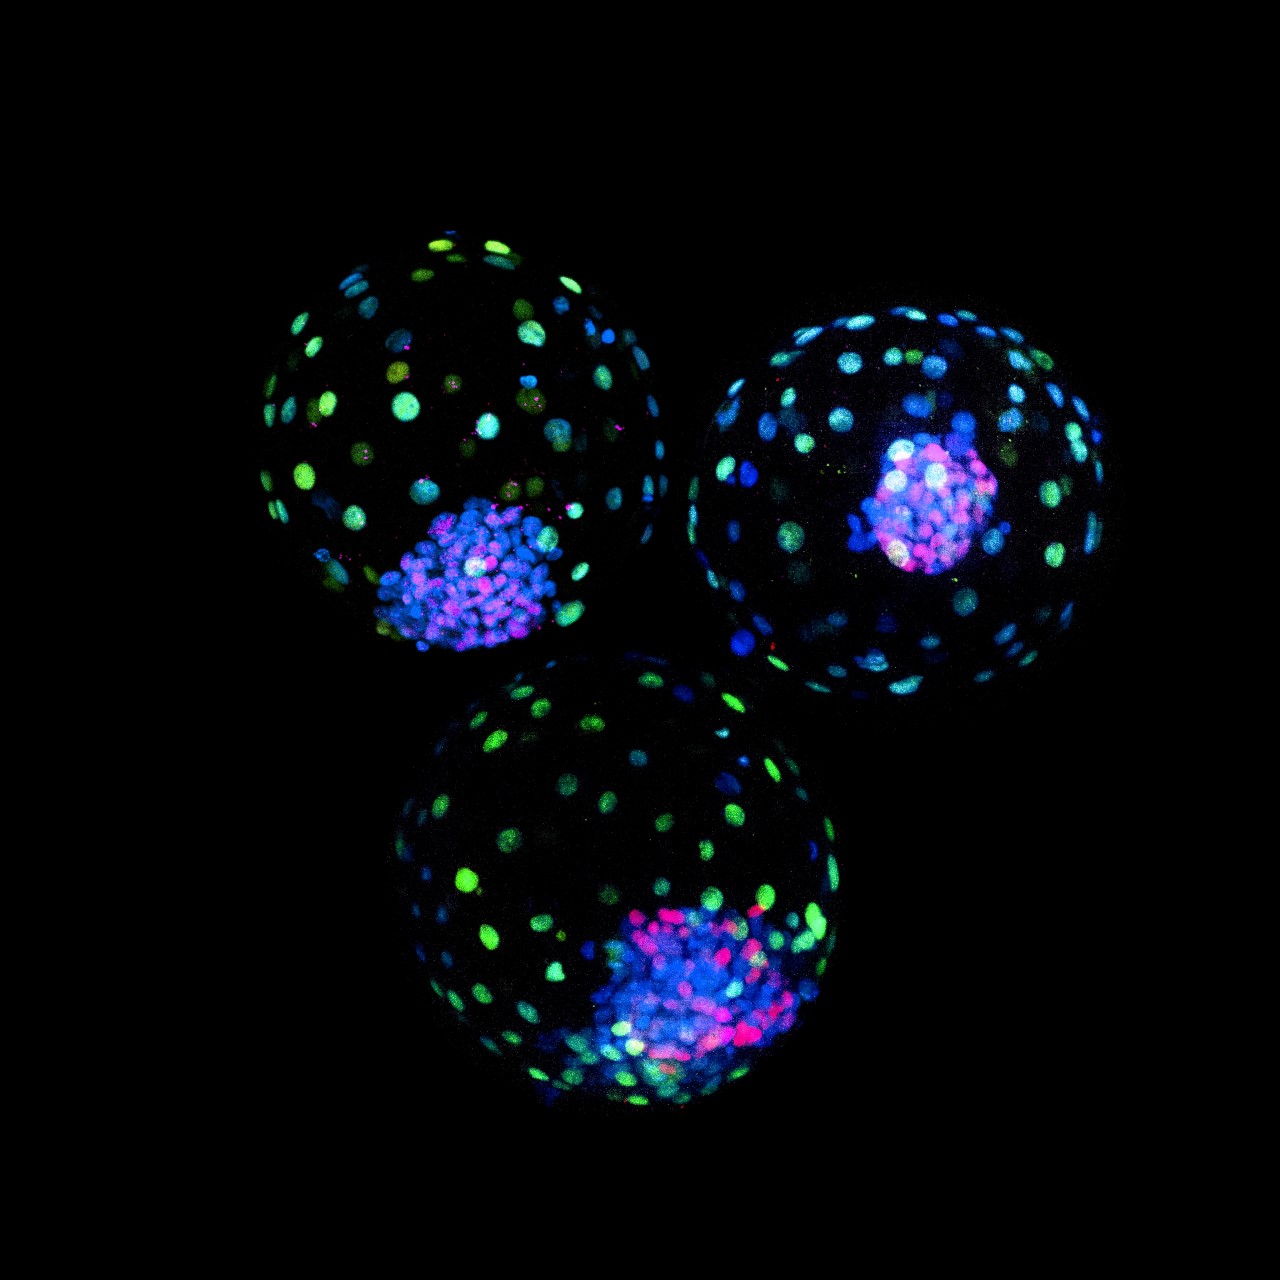 Bovine blastoids assembled by trophoblast stem cells and expanded potential stem cells. Stained for epiblast marker SOX2 (magenta), hypoblast marker SOX17 (red) and trophectoderm marker CDX2 (green).